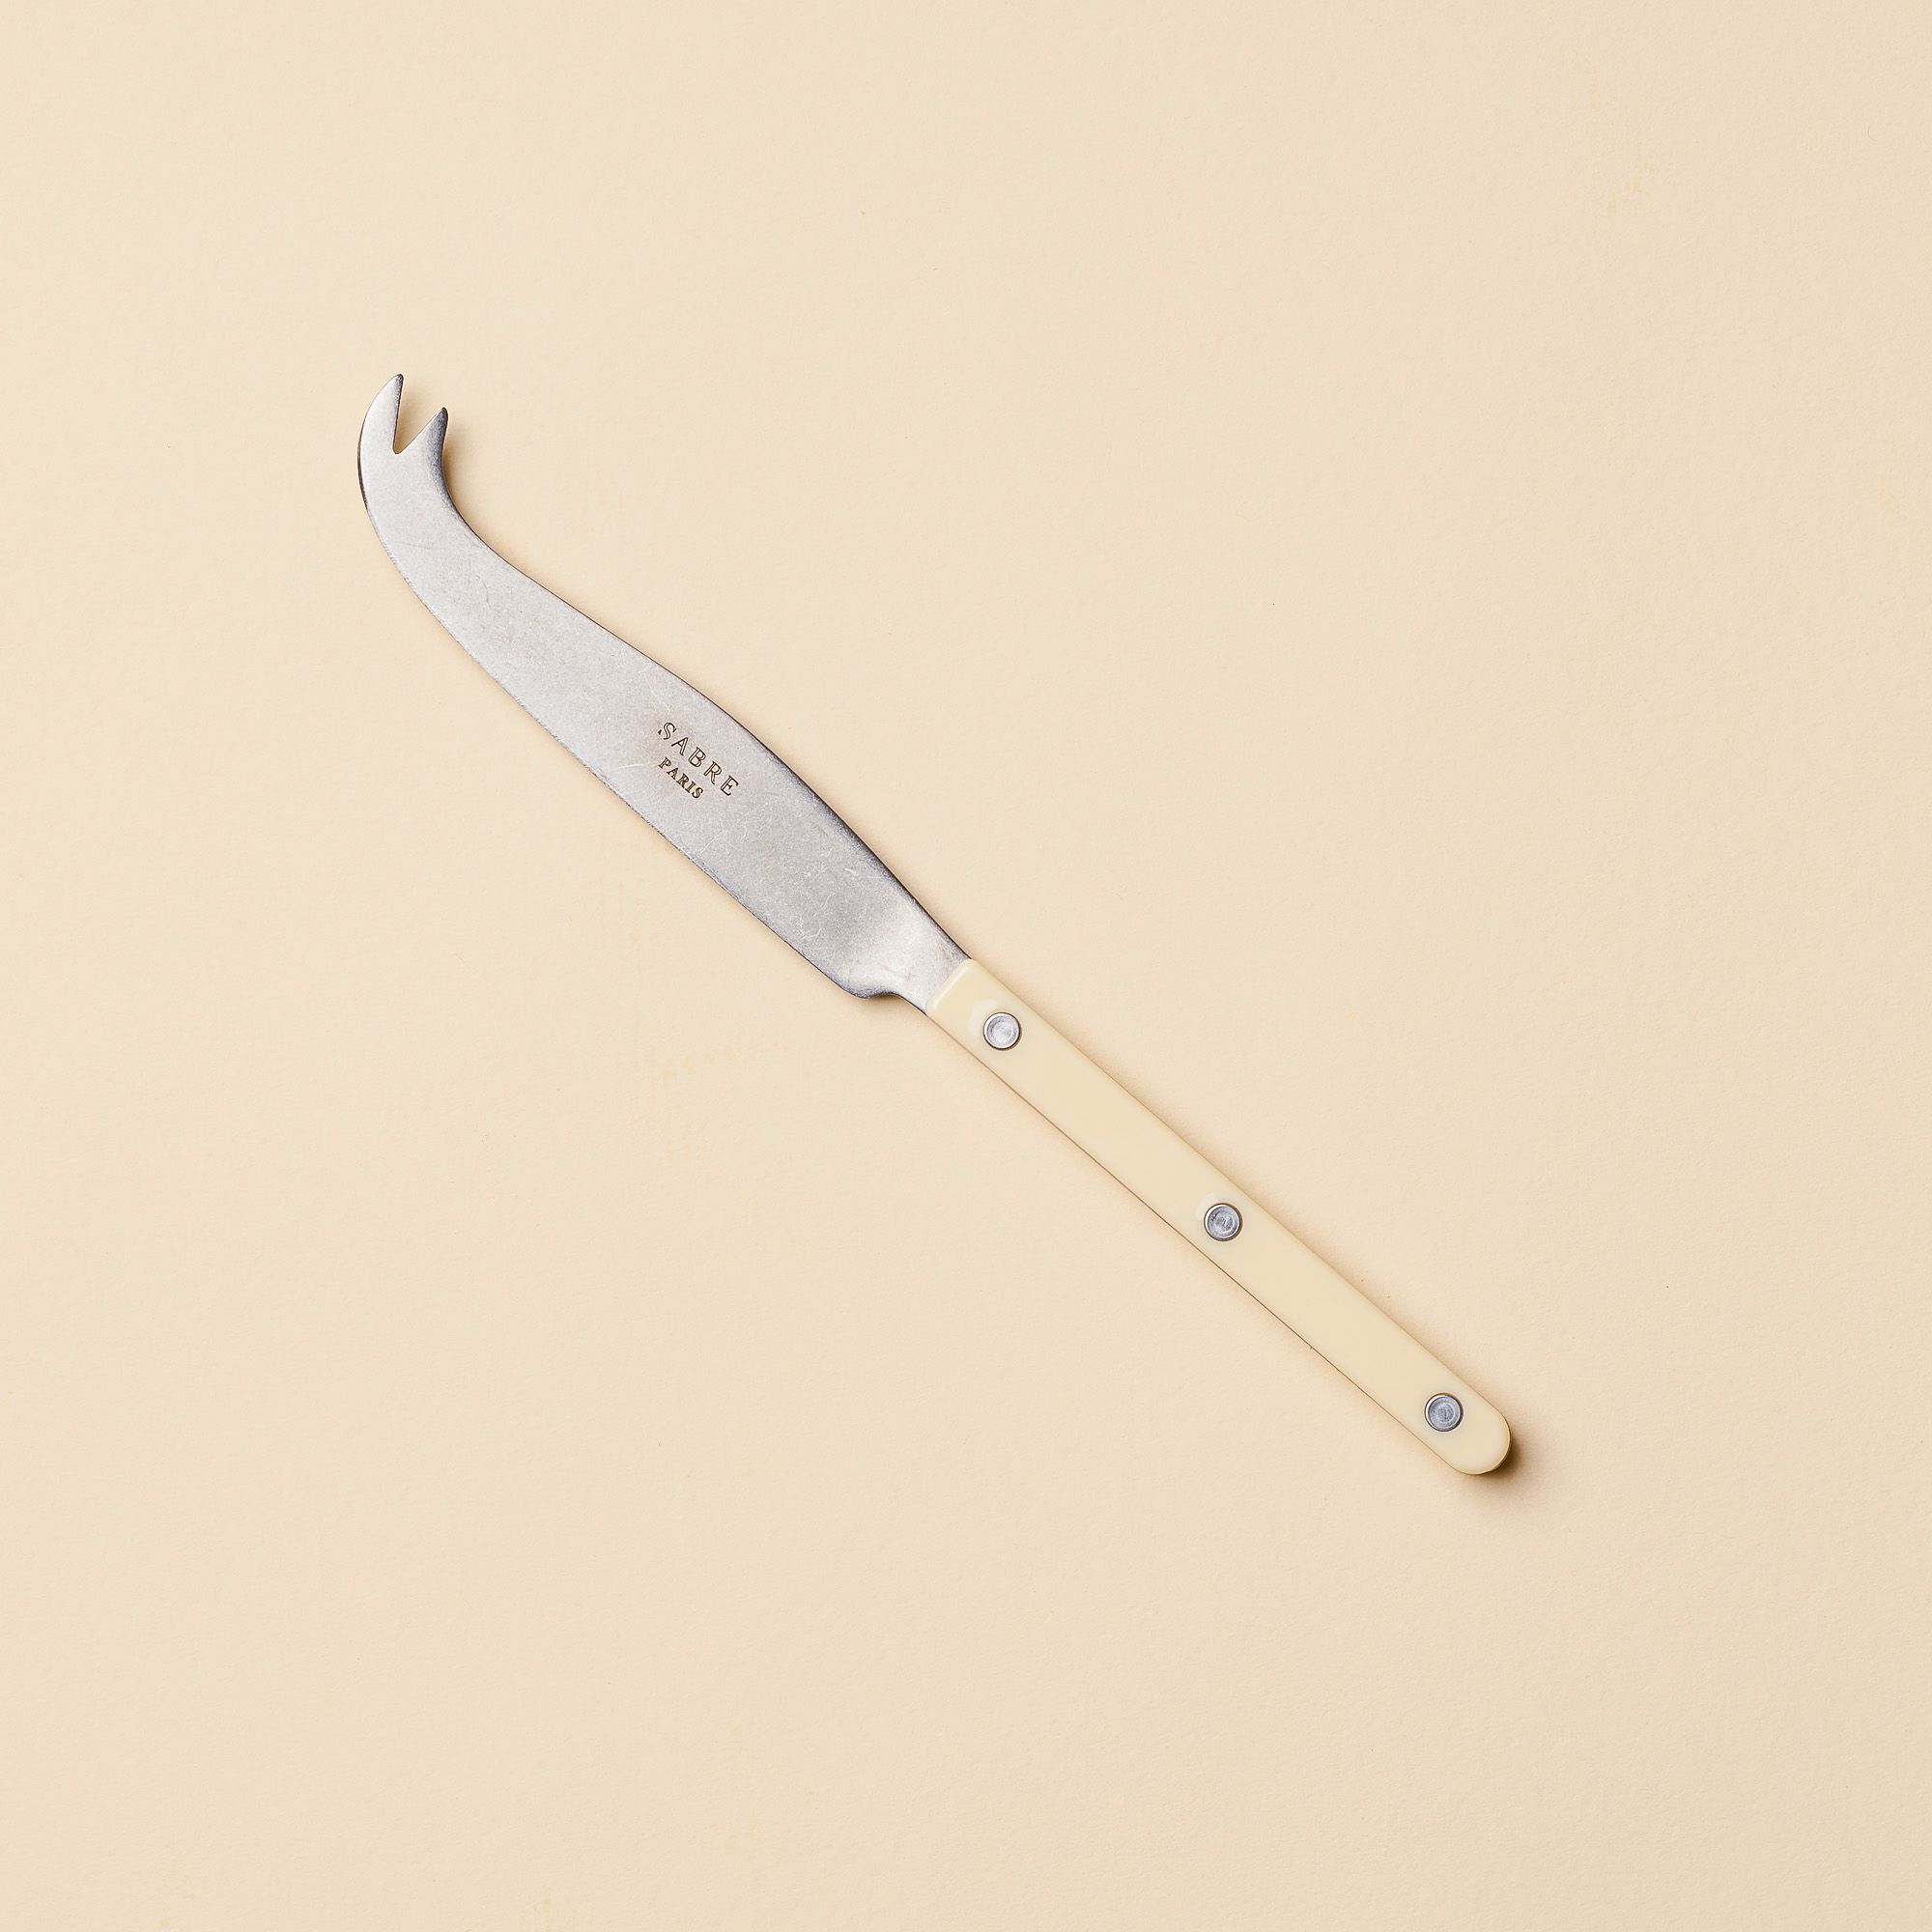 A stylish long and thin cheese knife with a matte acrylic handle and a scooped tip